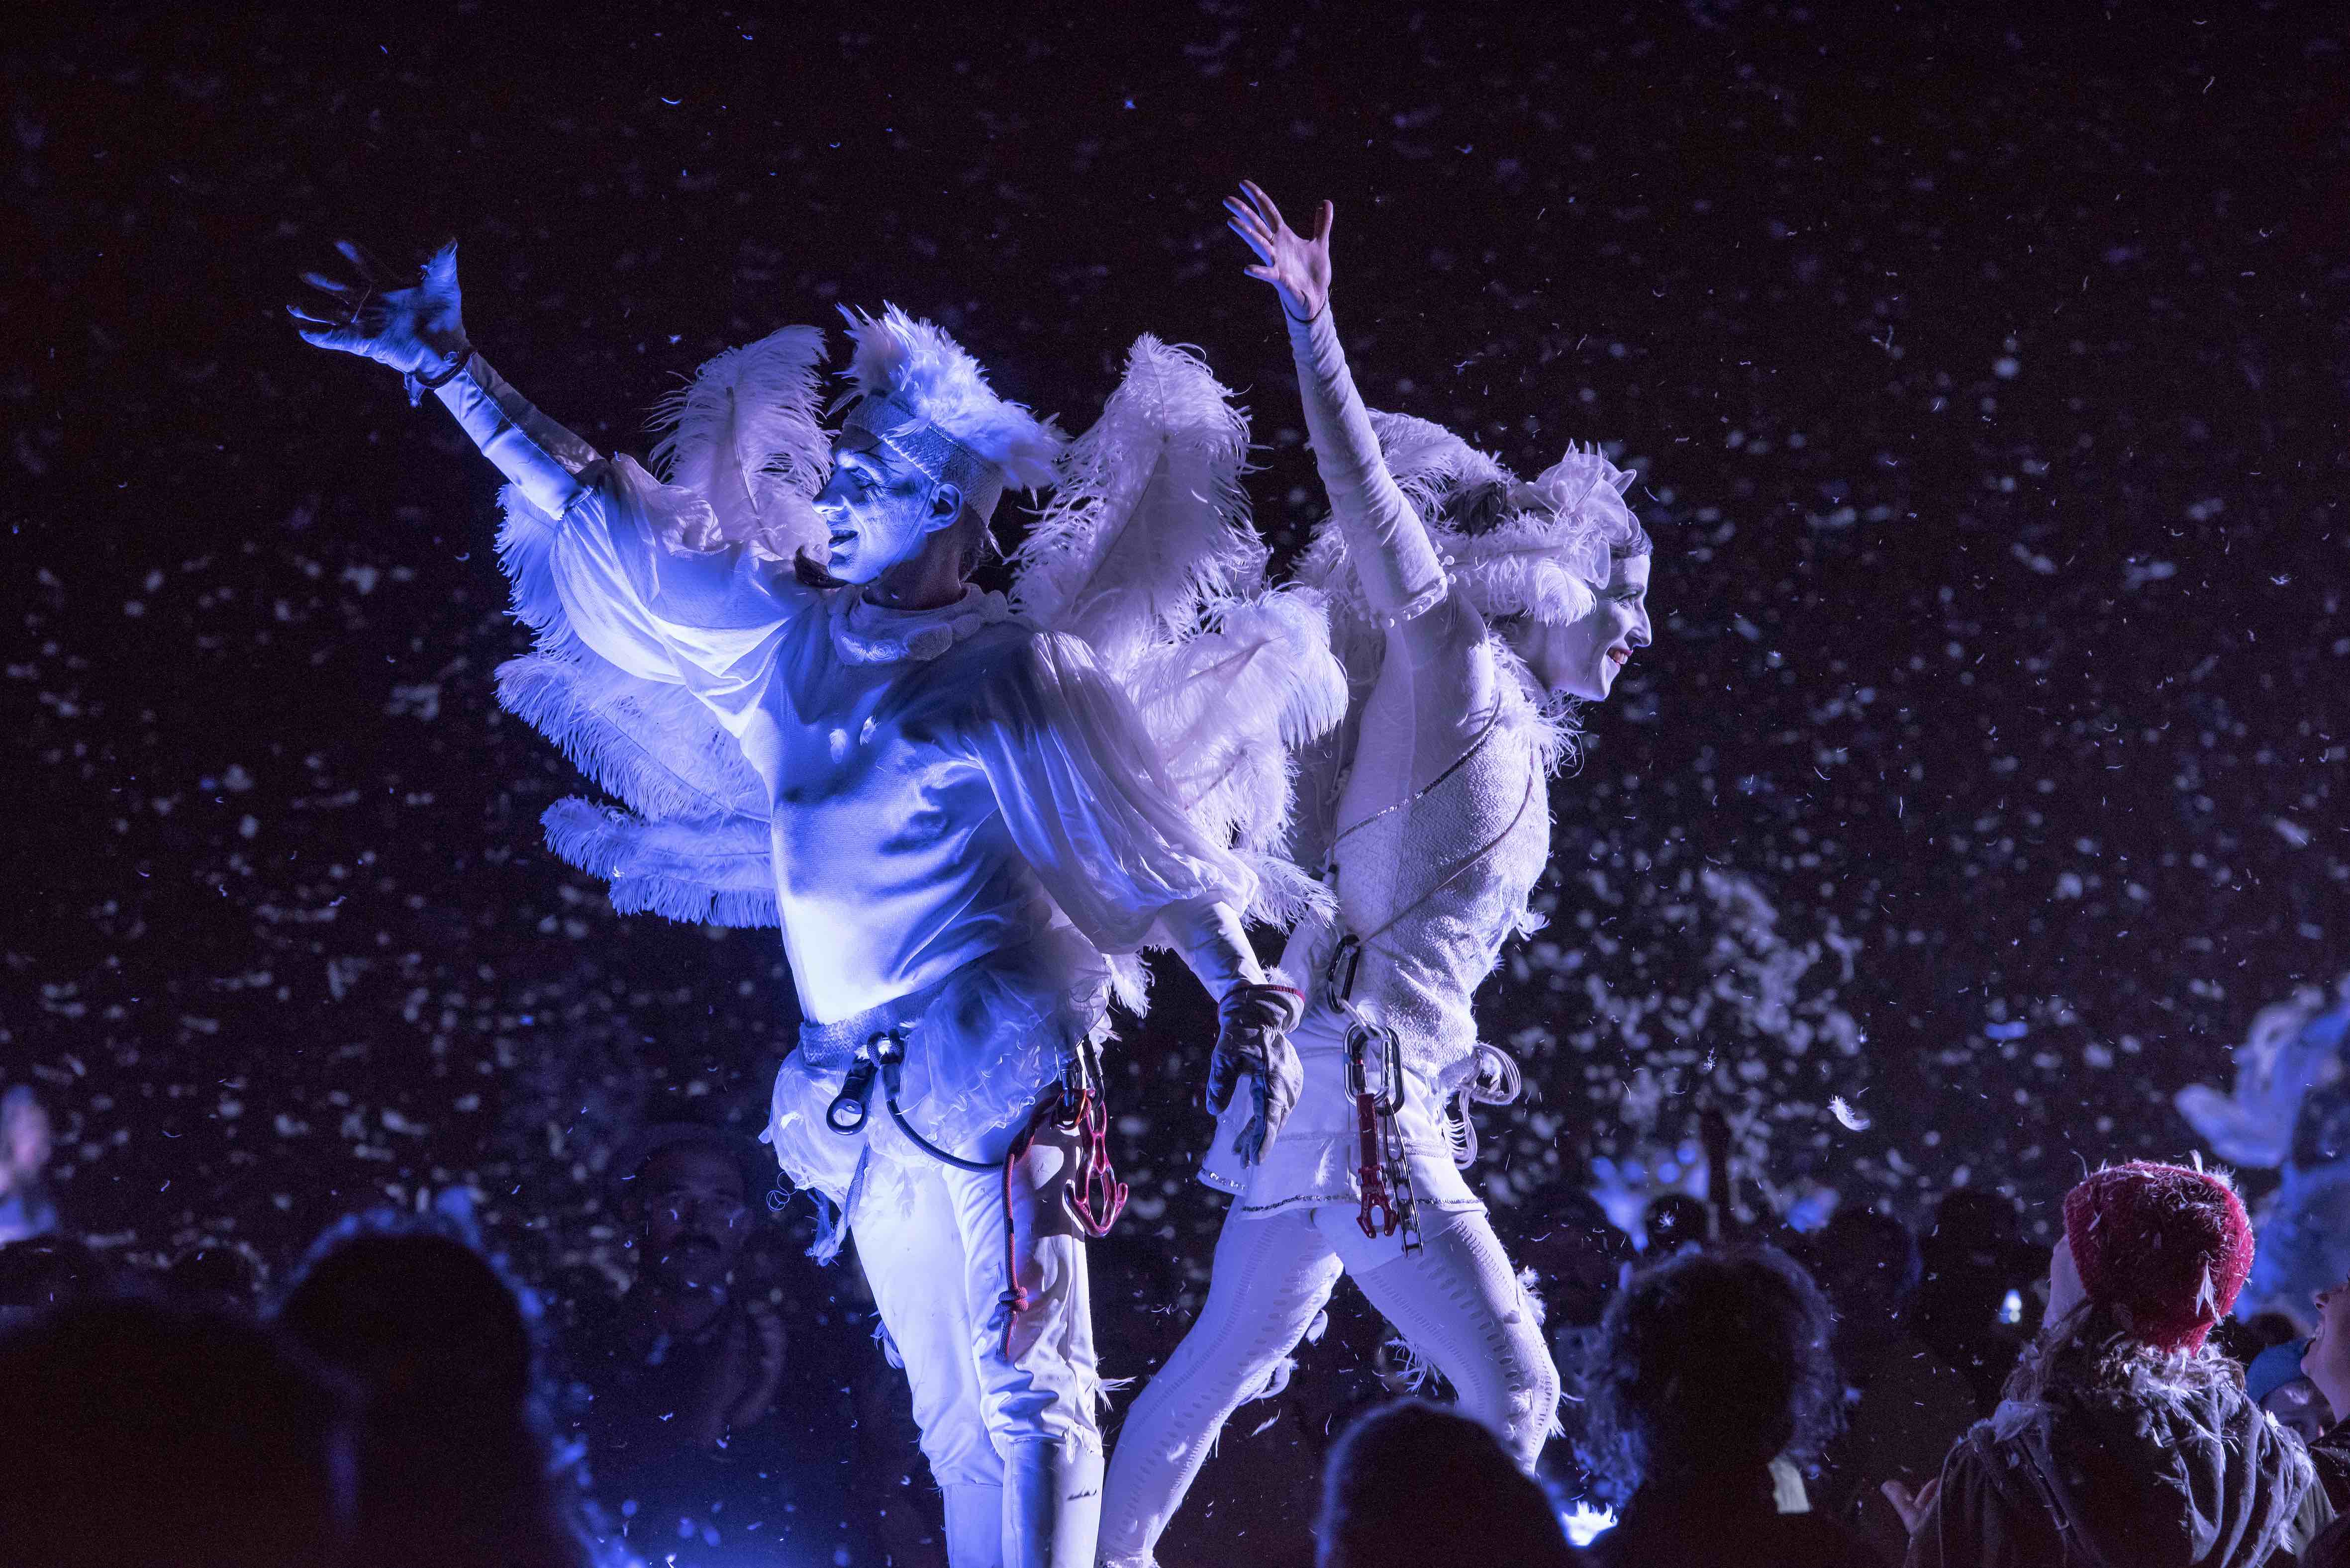 FLORENCE + THE MACHINE, BON IVER & AERIAL ANGELS SPECTACULAR ANNOUNCED FOR WOMADELAIDE 2023